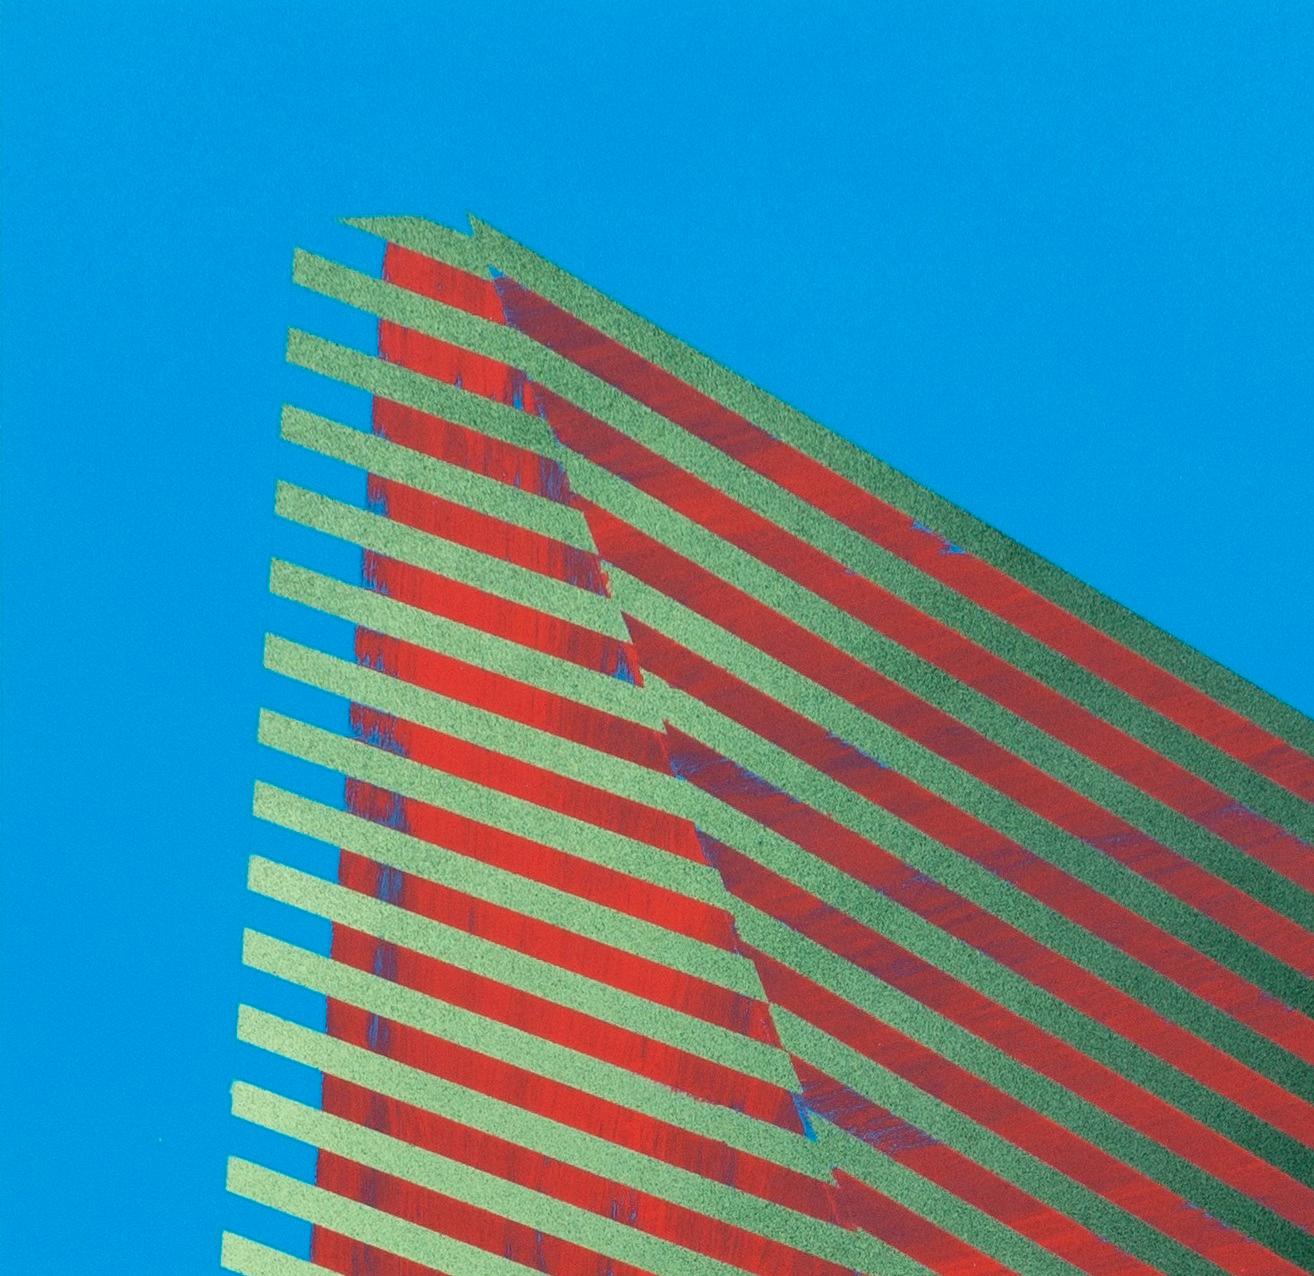 Prismatic Polygon XII: geometric abstract painting; sky blue, red, yellow lines - Painting by Jay Walker